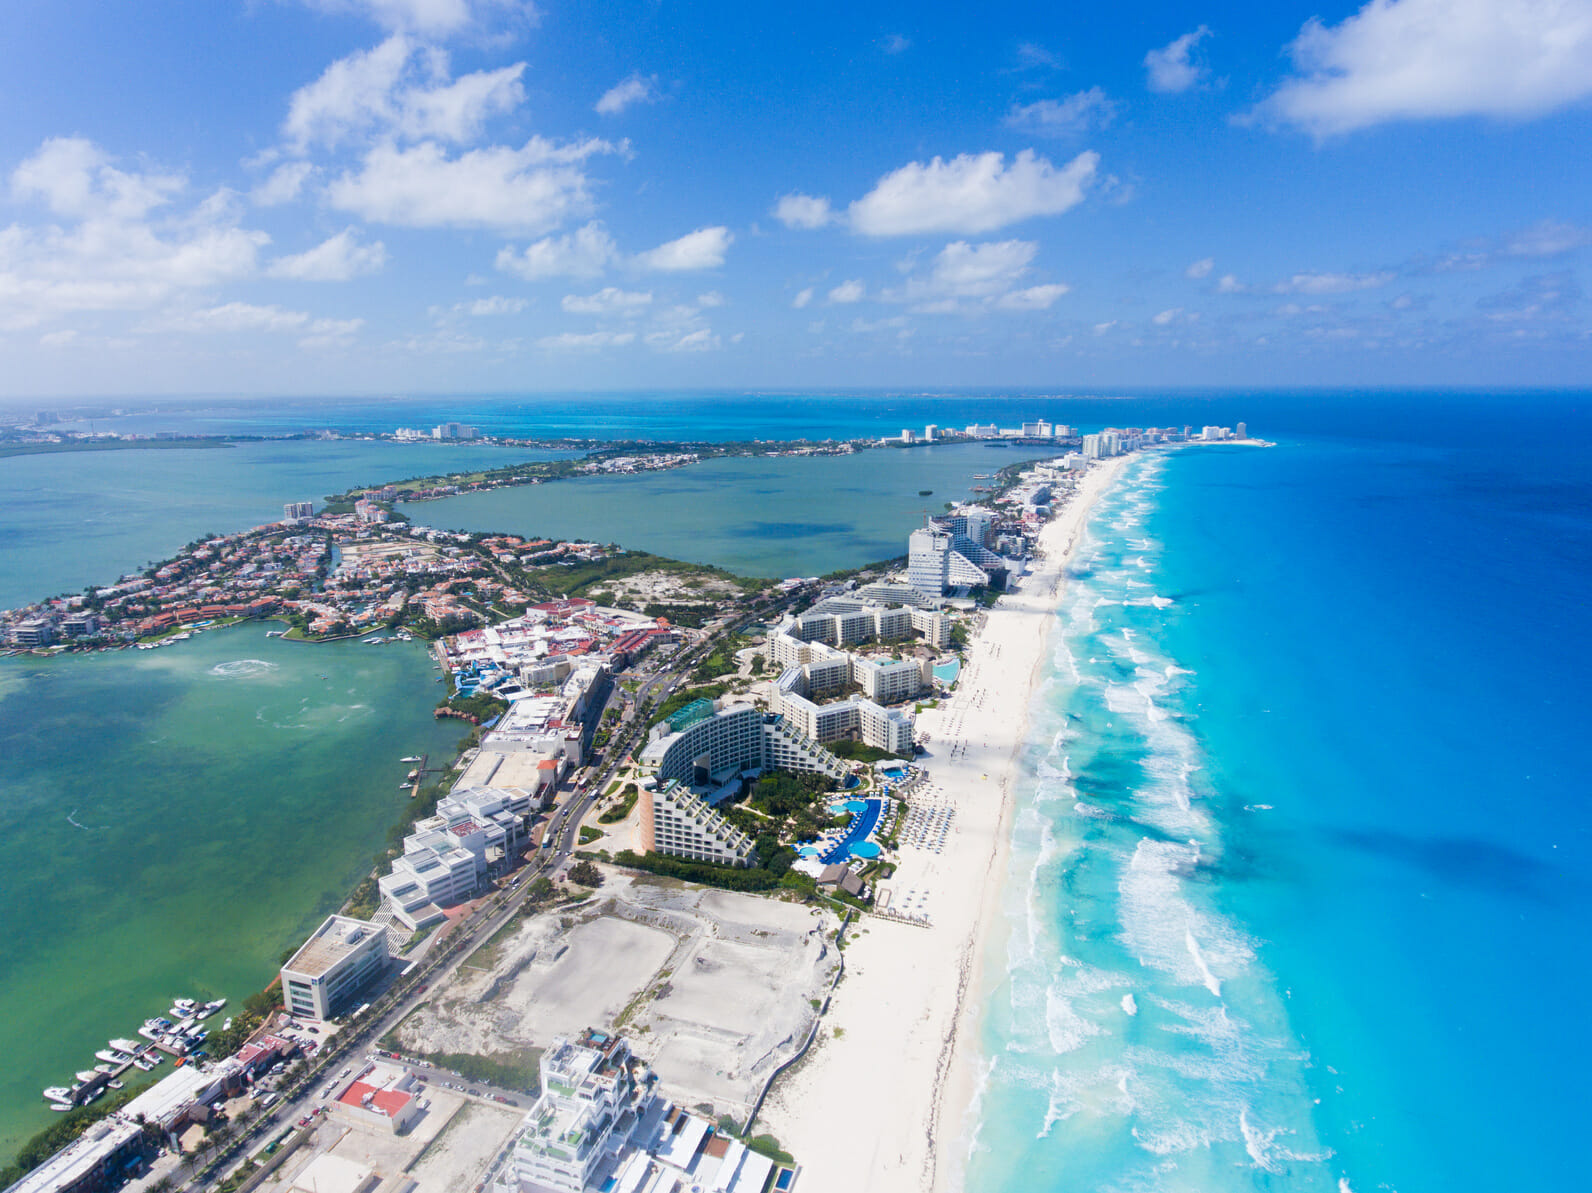 Hotels in Cancun and Airlines to resume operations in June